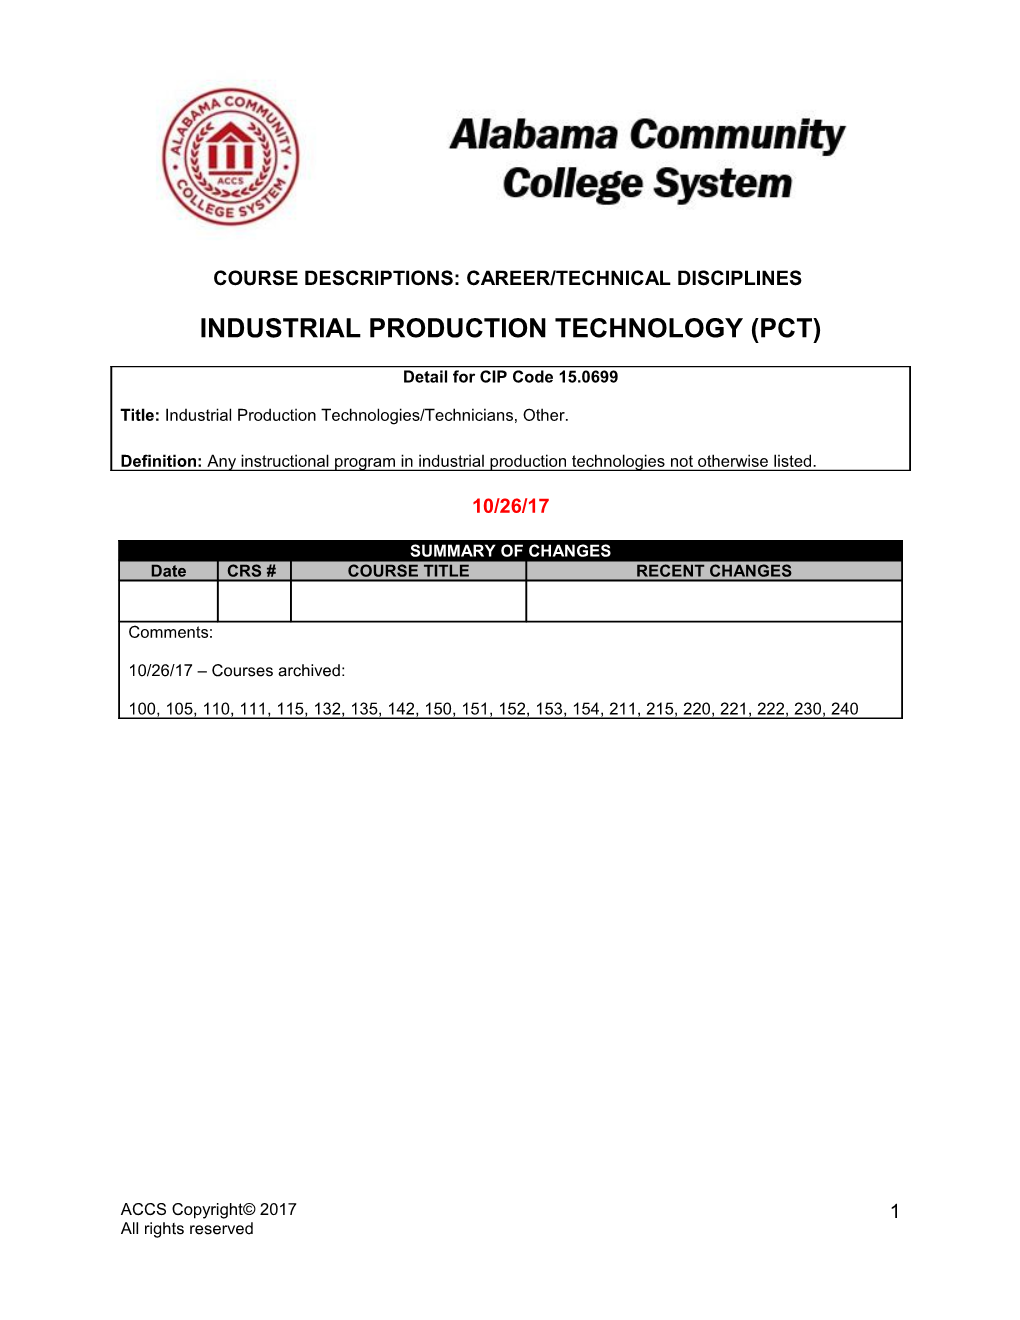 Industrial Production Technology